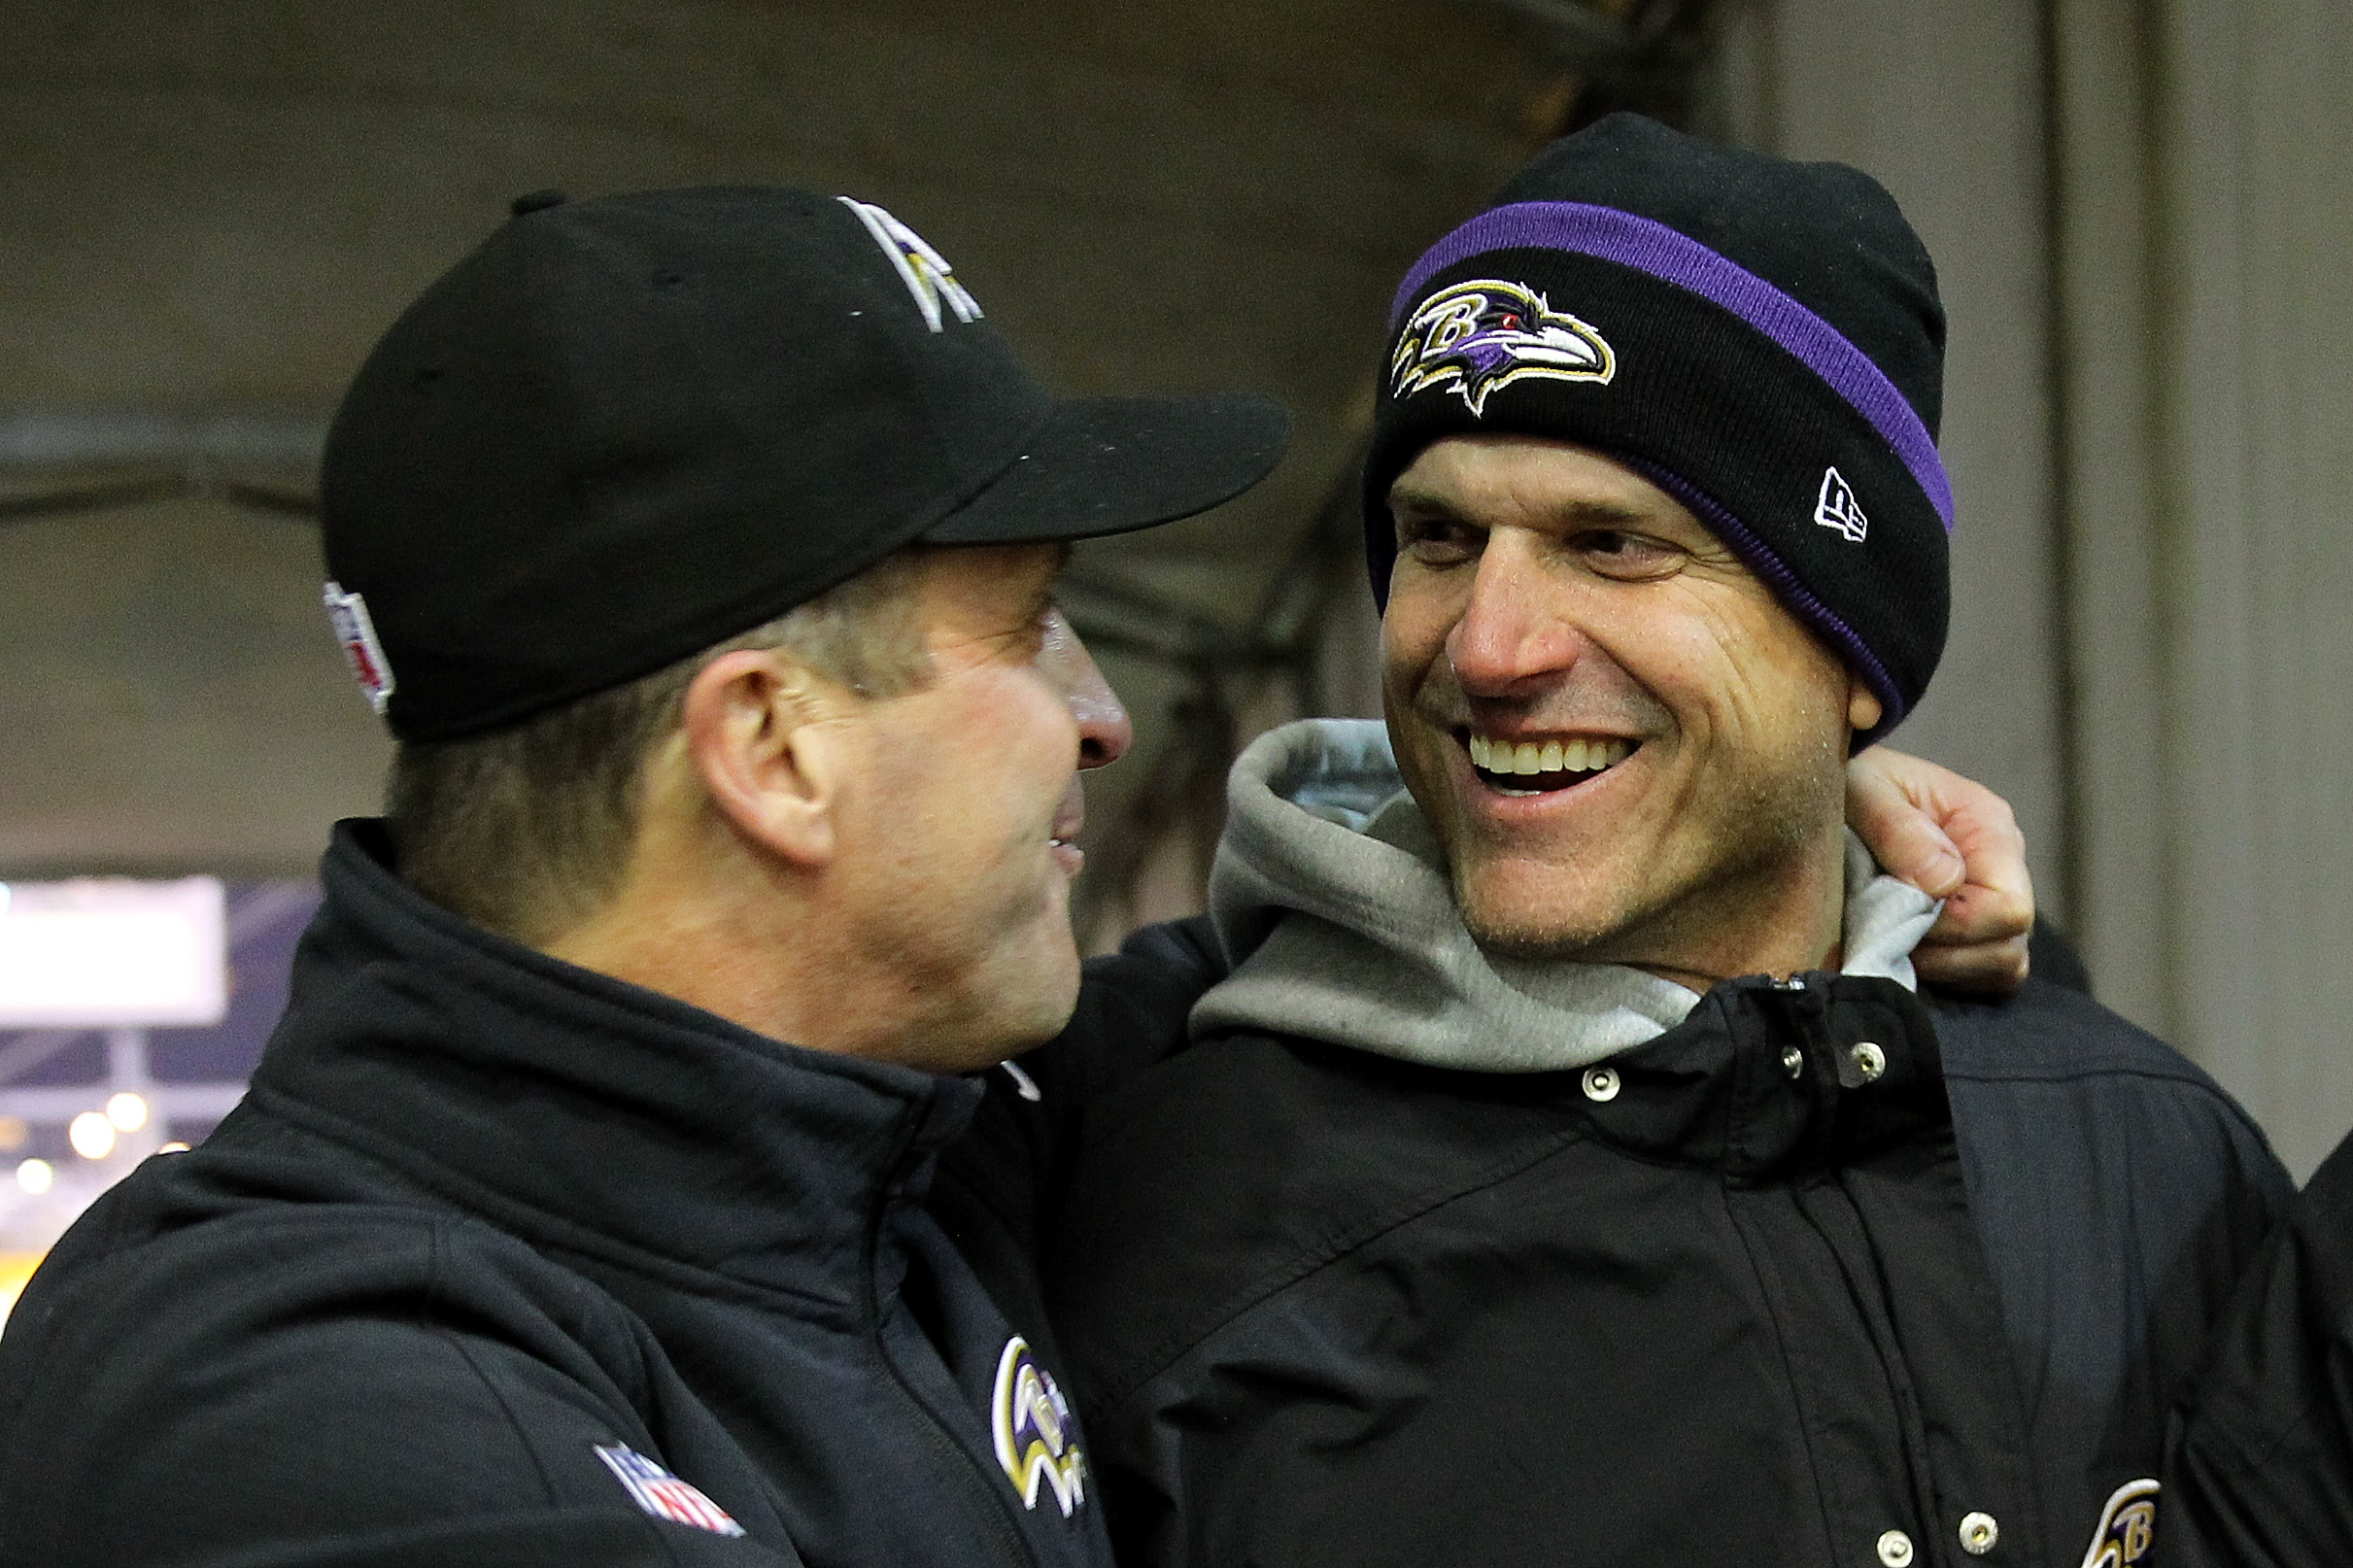 PITTSBURGH, PA - JANUARY 03: Michigan coach Jim Harbaugh (R) celebrates with his brother, head coach John Harbaugh (L) of the Baltimore Ravens after the Ravens defeated the Pittsburgh Steelers 30-17 in their AFC Wild Card game at Heinz Field on January 3, 2015 in Pittsburgh, Pennsylvania. Jamie Squire/Getty Images